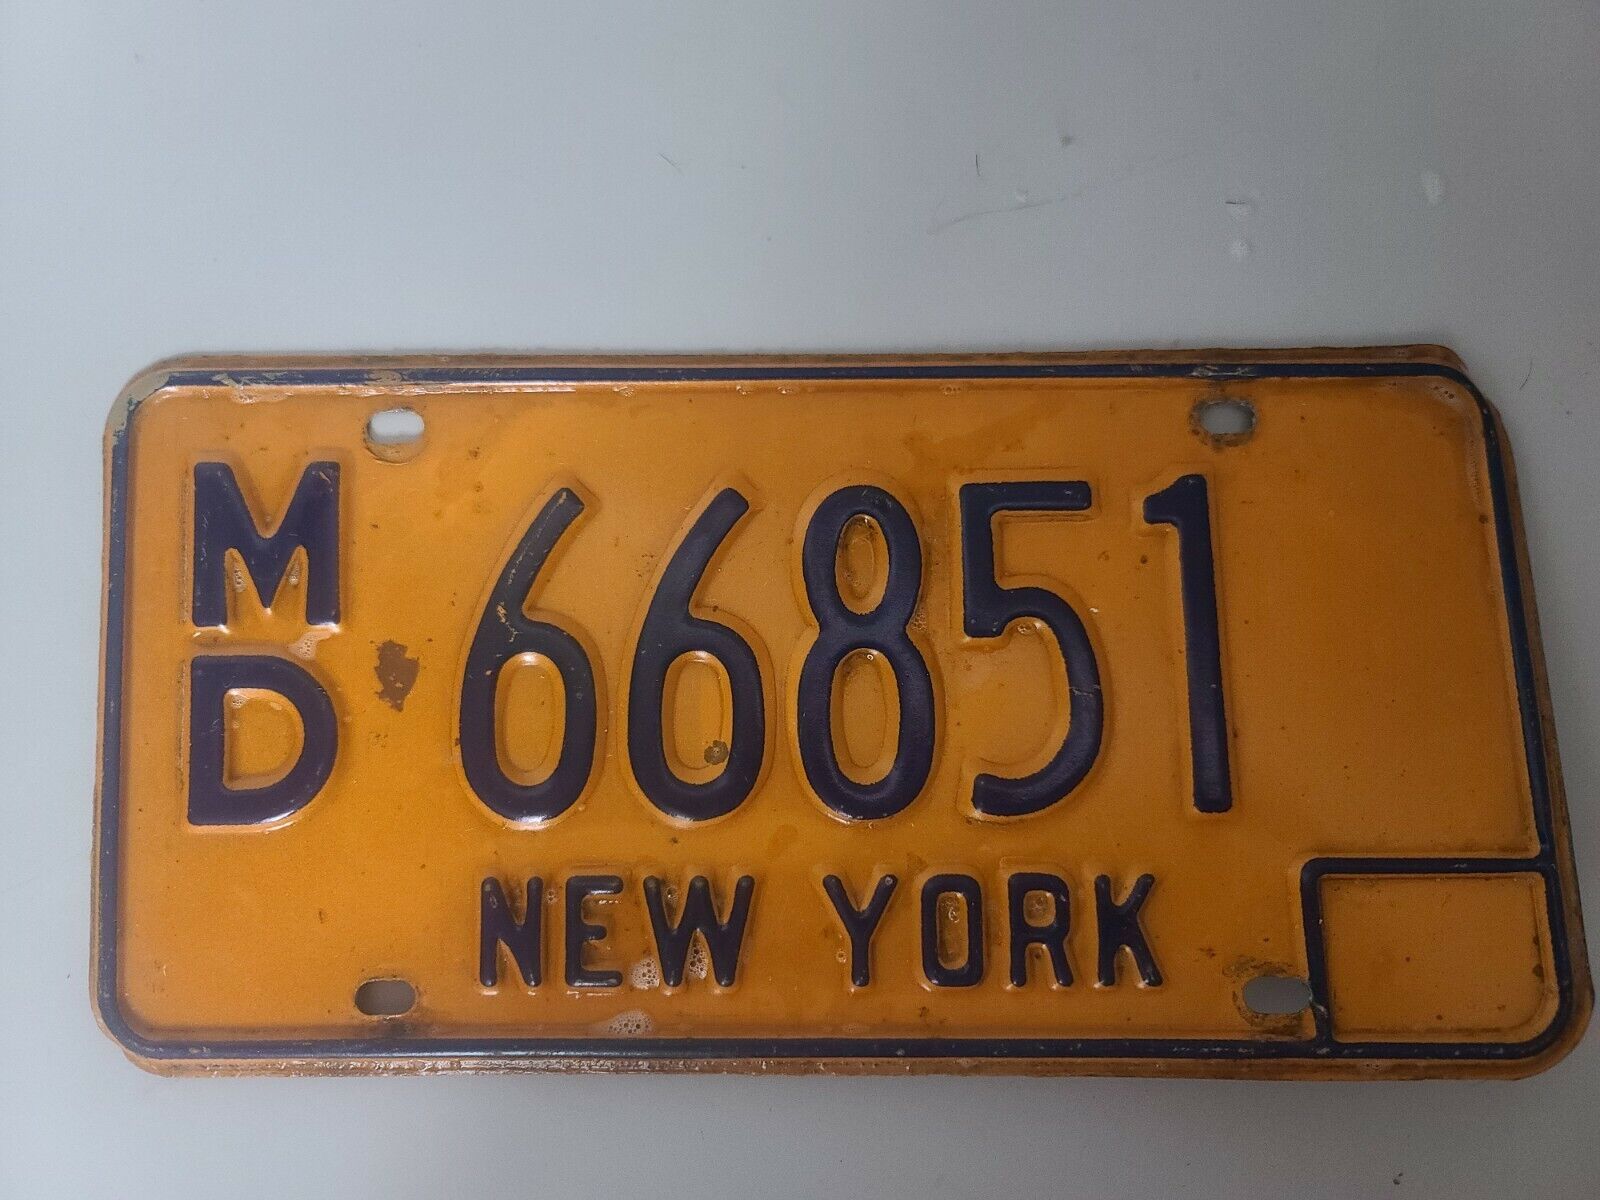 New York 1973-1986 Medical Doctor License Plate MD 66851  Good Condition